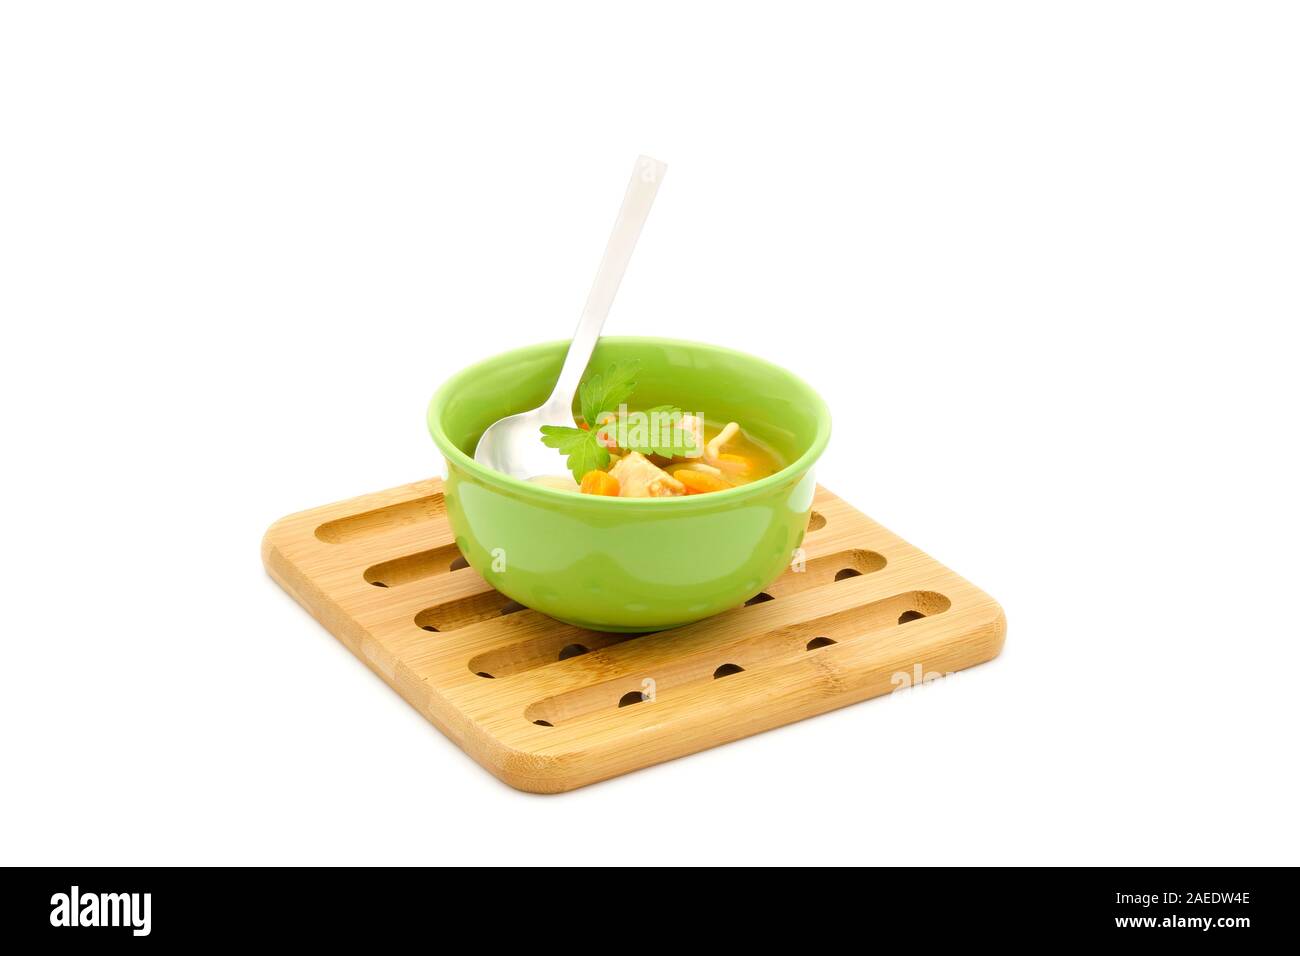 Bowl of Chicken noodle soup in a green bowl sitting on a wooden trivet photographed on a white background. Stock Photo